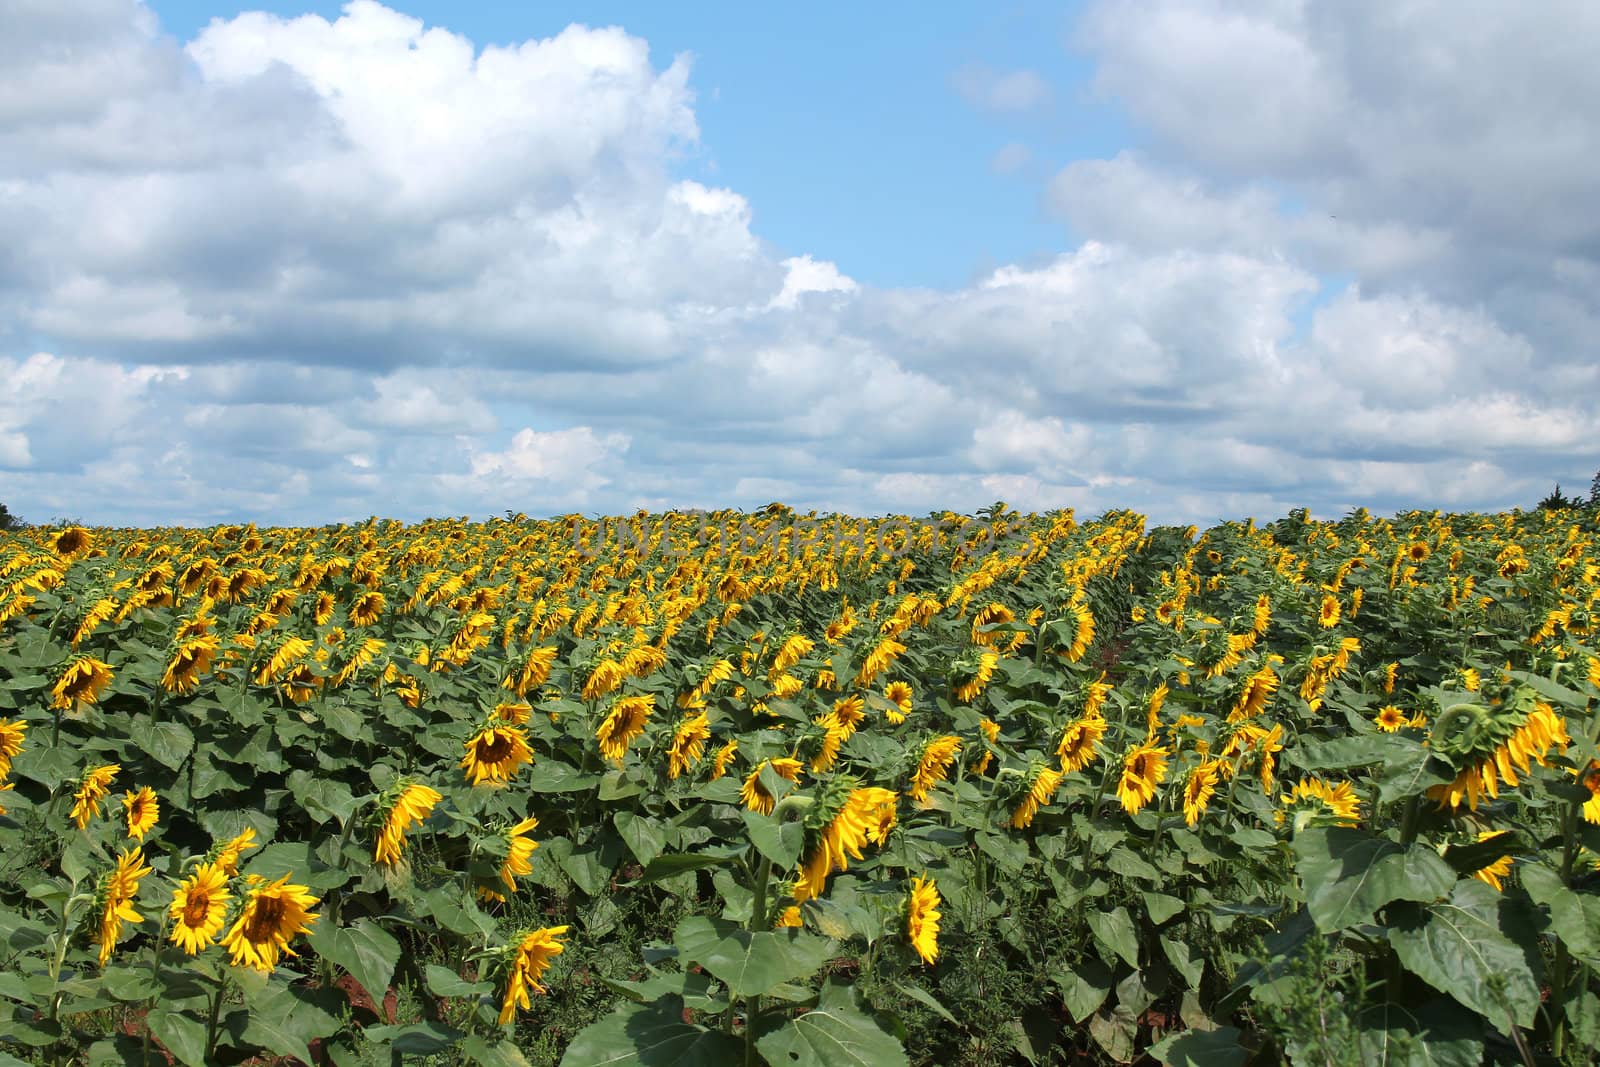 A Field of Sunflowers on a sunny day